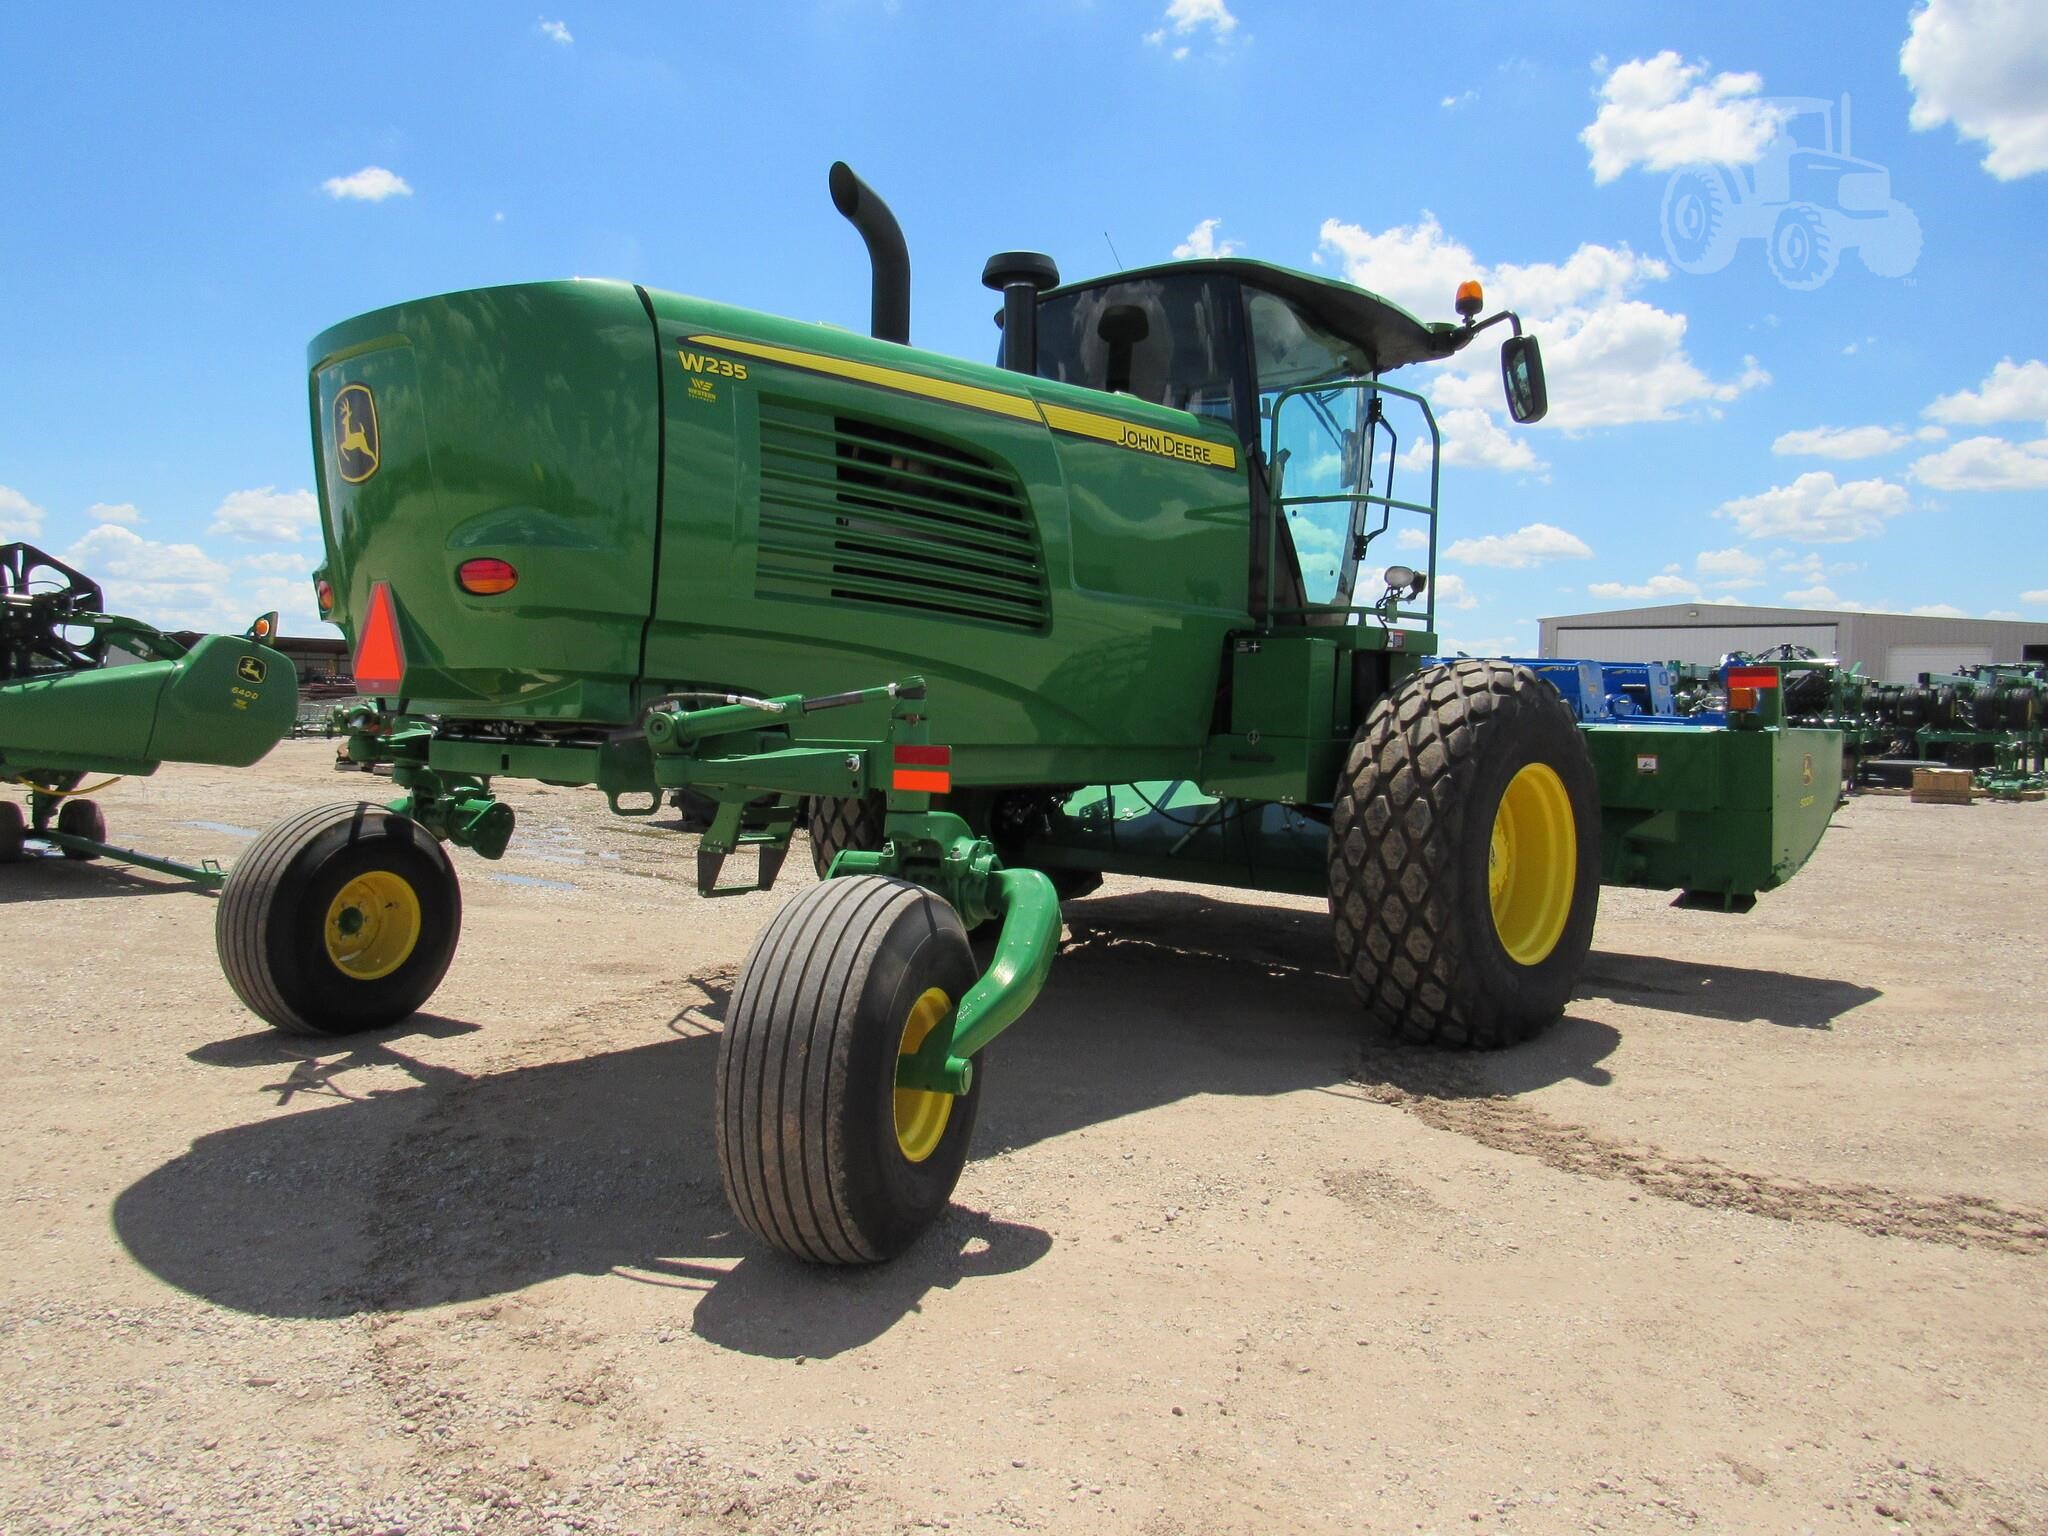 2019 JOHN DEERE W235 For Sale In PERRYTON, Texas | TractorHouse.com